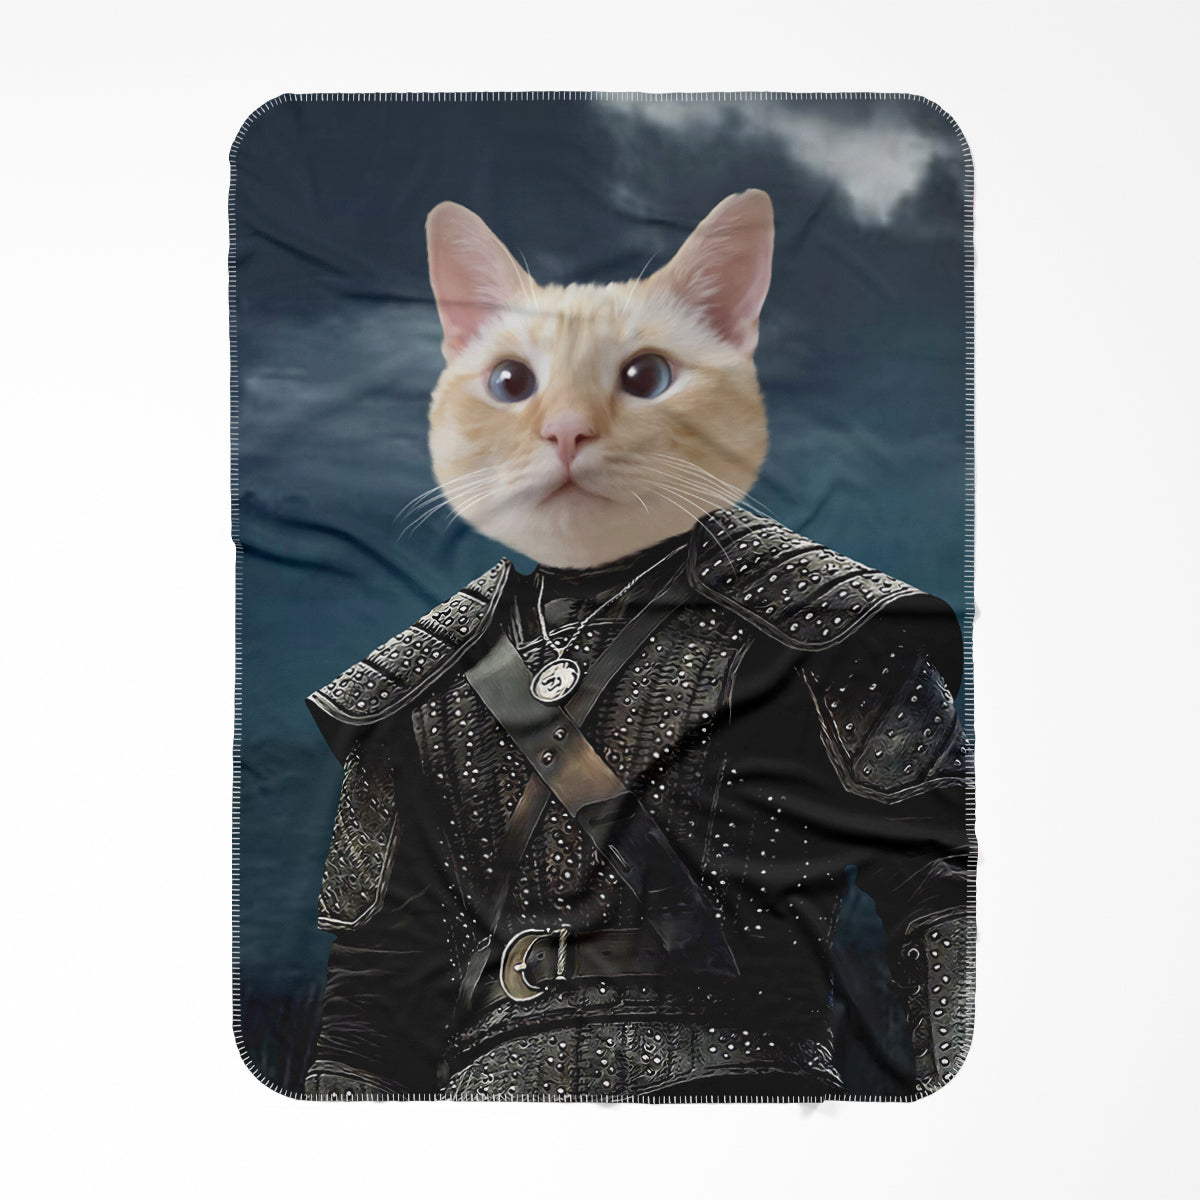 The Witcher Paw & Glory, pawandglory, Pet Portraits blanket, pet picture on blanket, custom pet blanket, dog photo blanket, blanket with dog on it, dog on blanket, best pet photo blanket